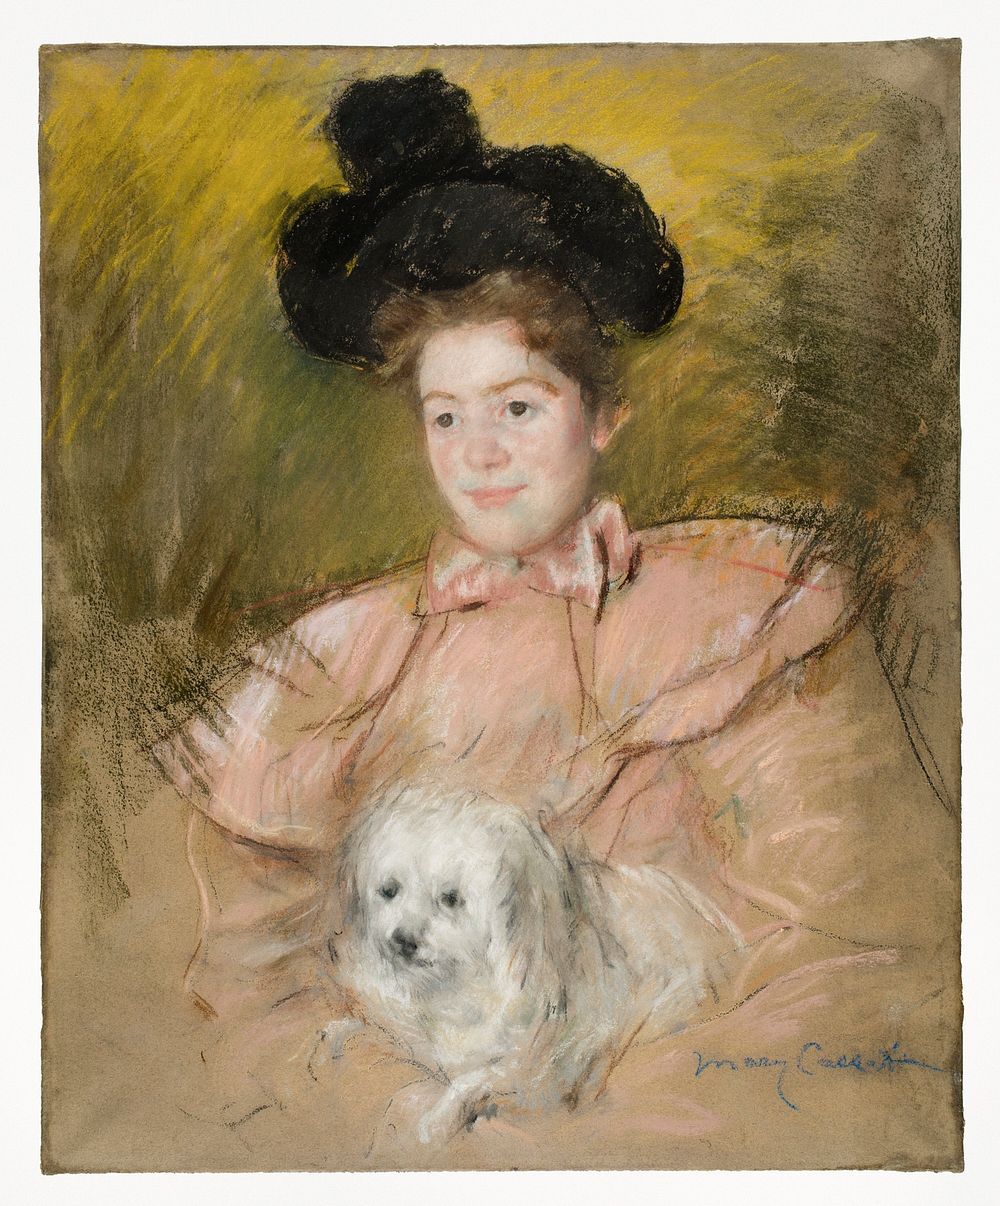 Woman in Raspberry Costume Holding a Dog (c. 1901) drawing in high resolution by Mary Cassatt. Original from Smithsonian…